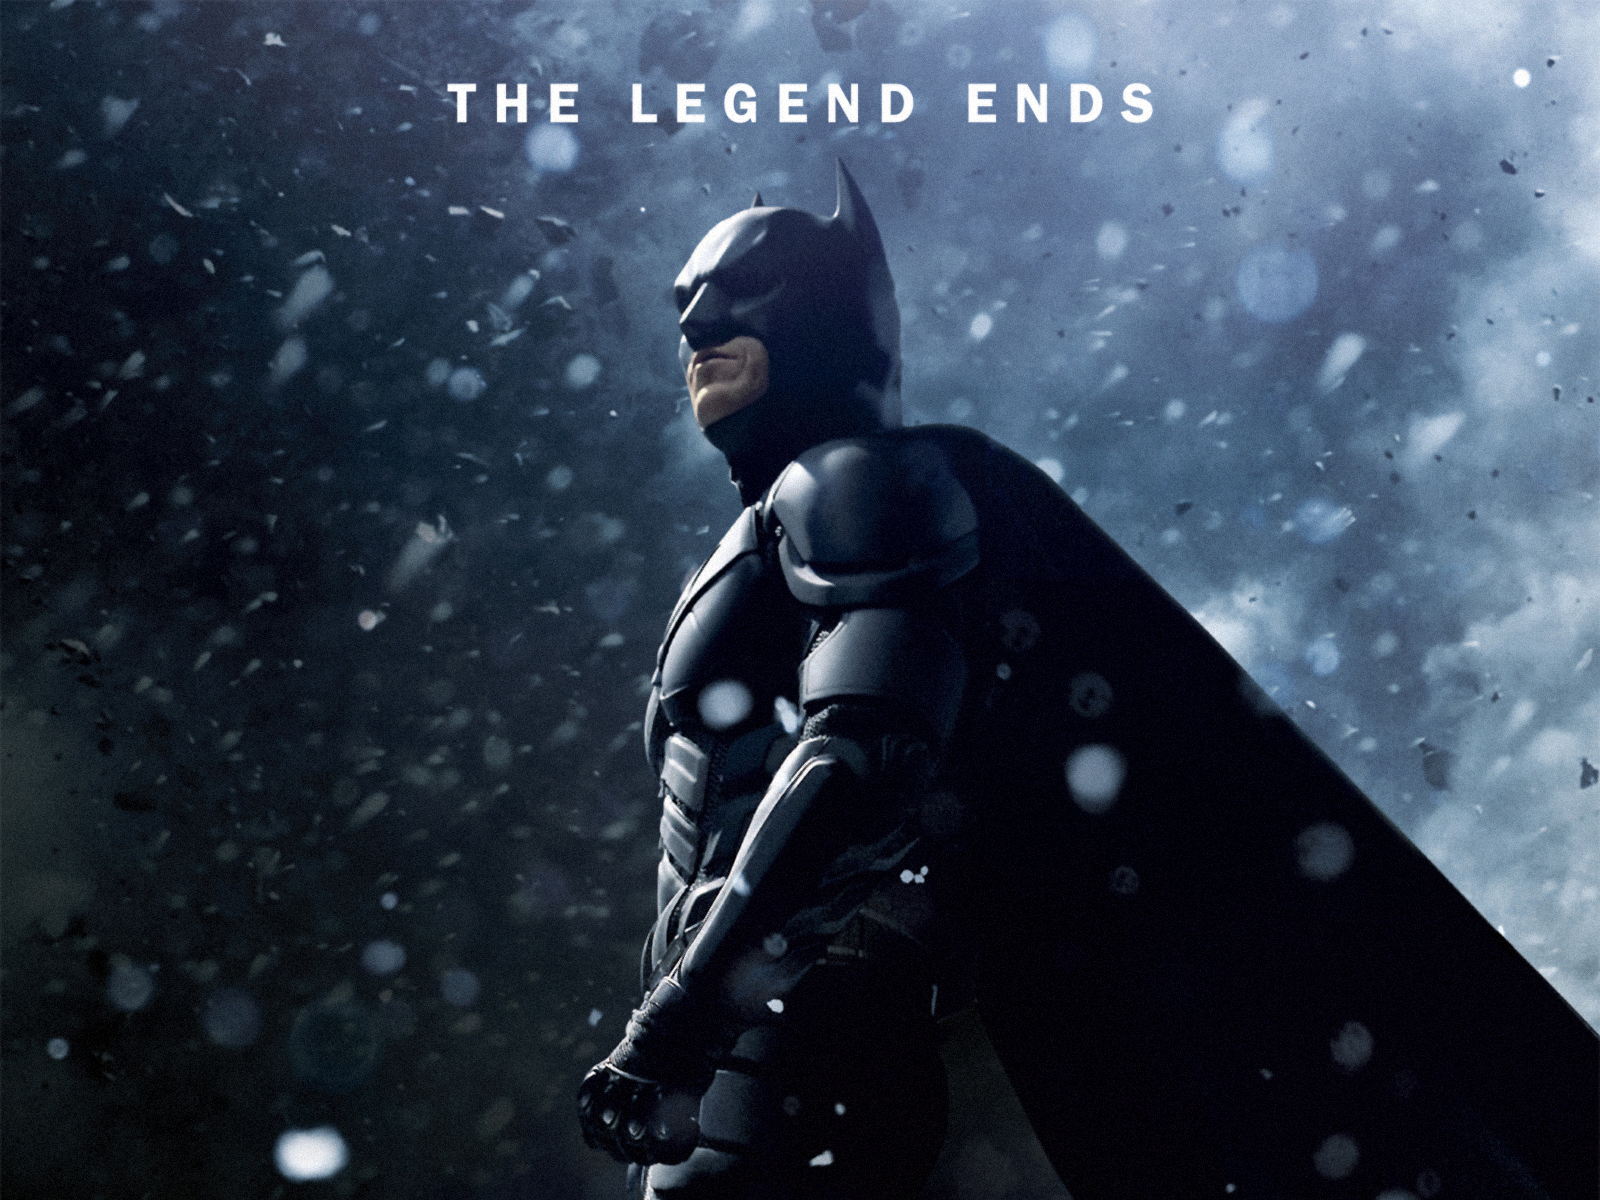 The Dark Knight Rises download the new version for windows